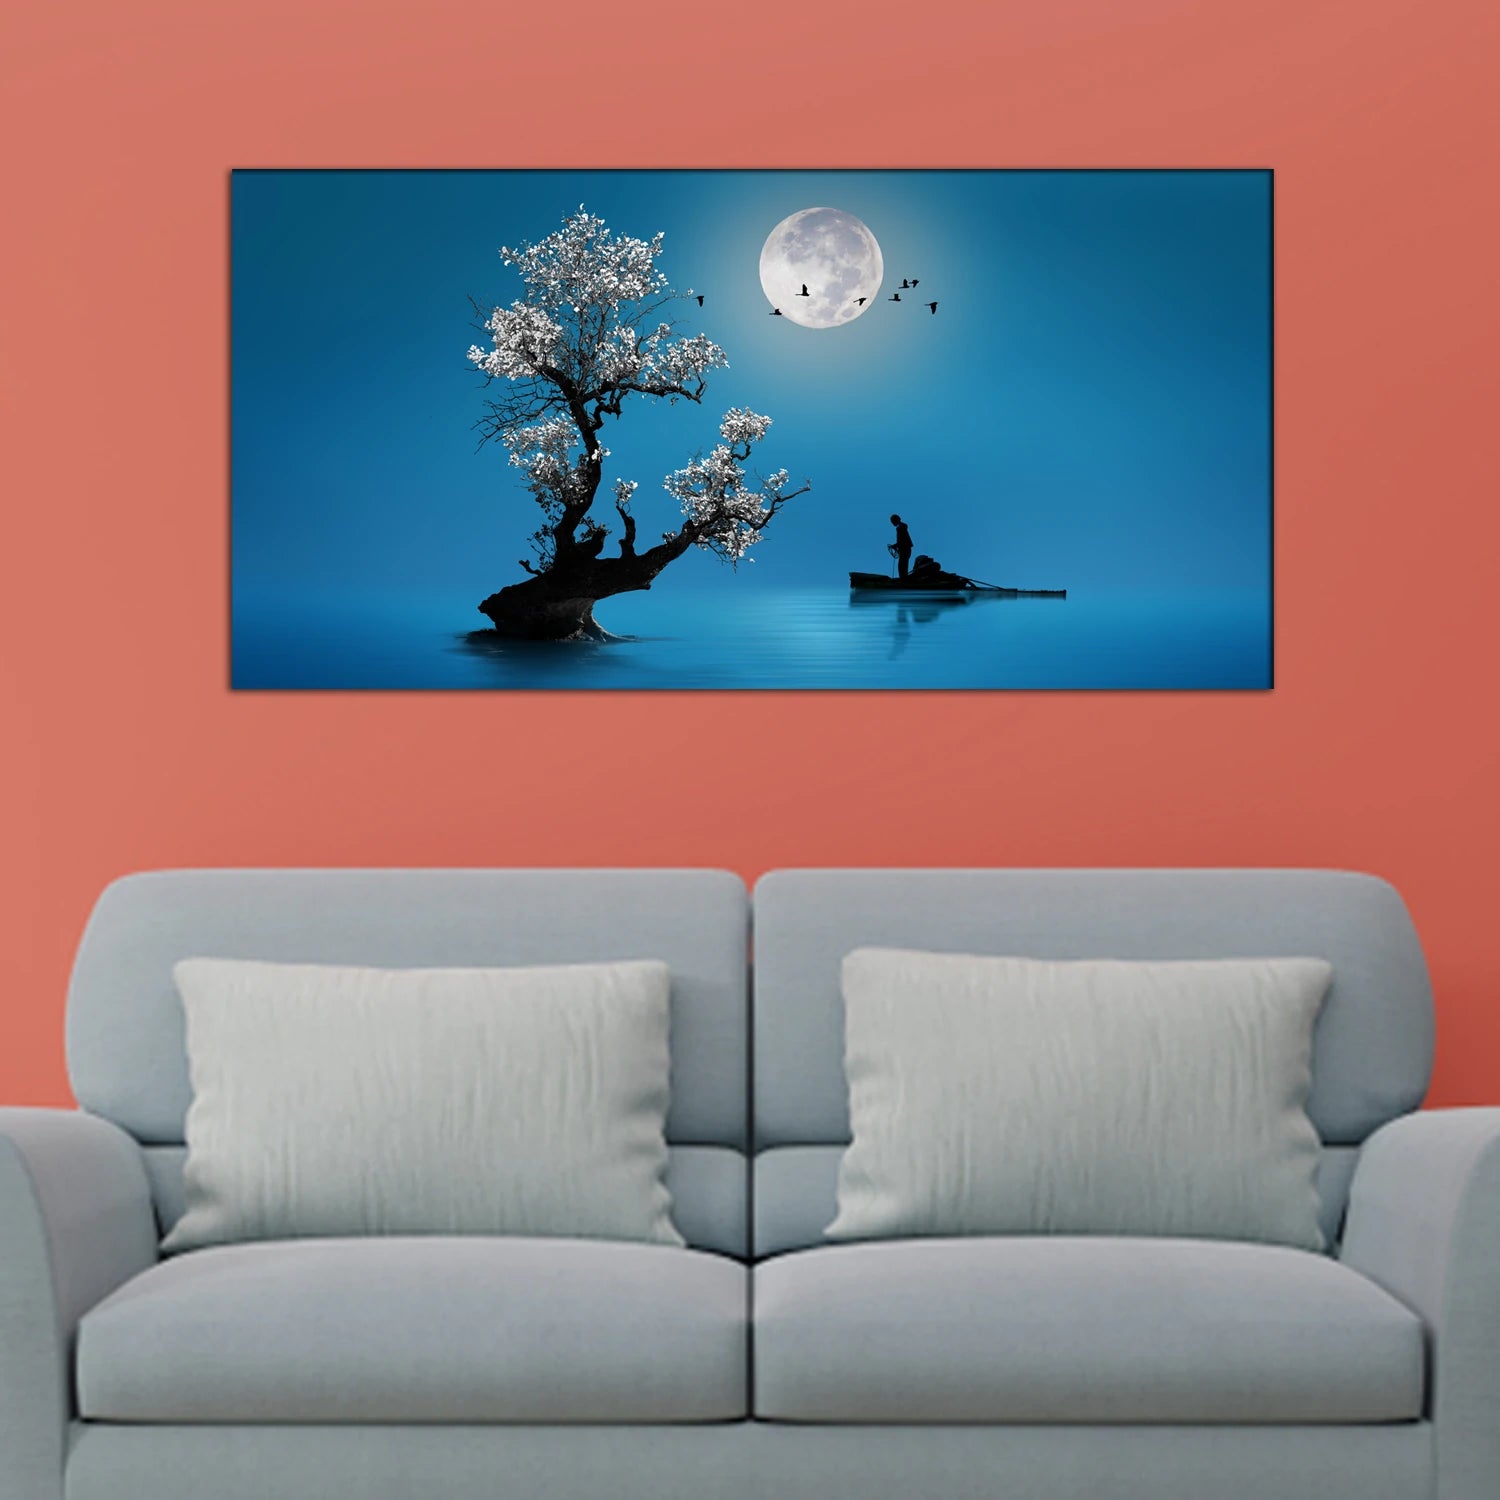 Fishing under the moon light Canvas Print Wall Painting